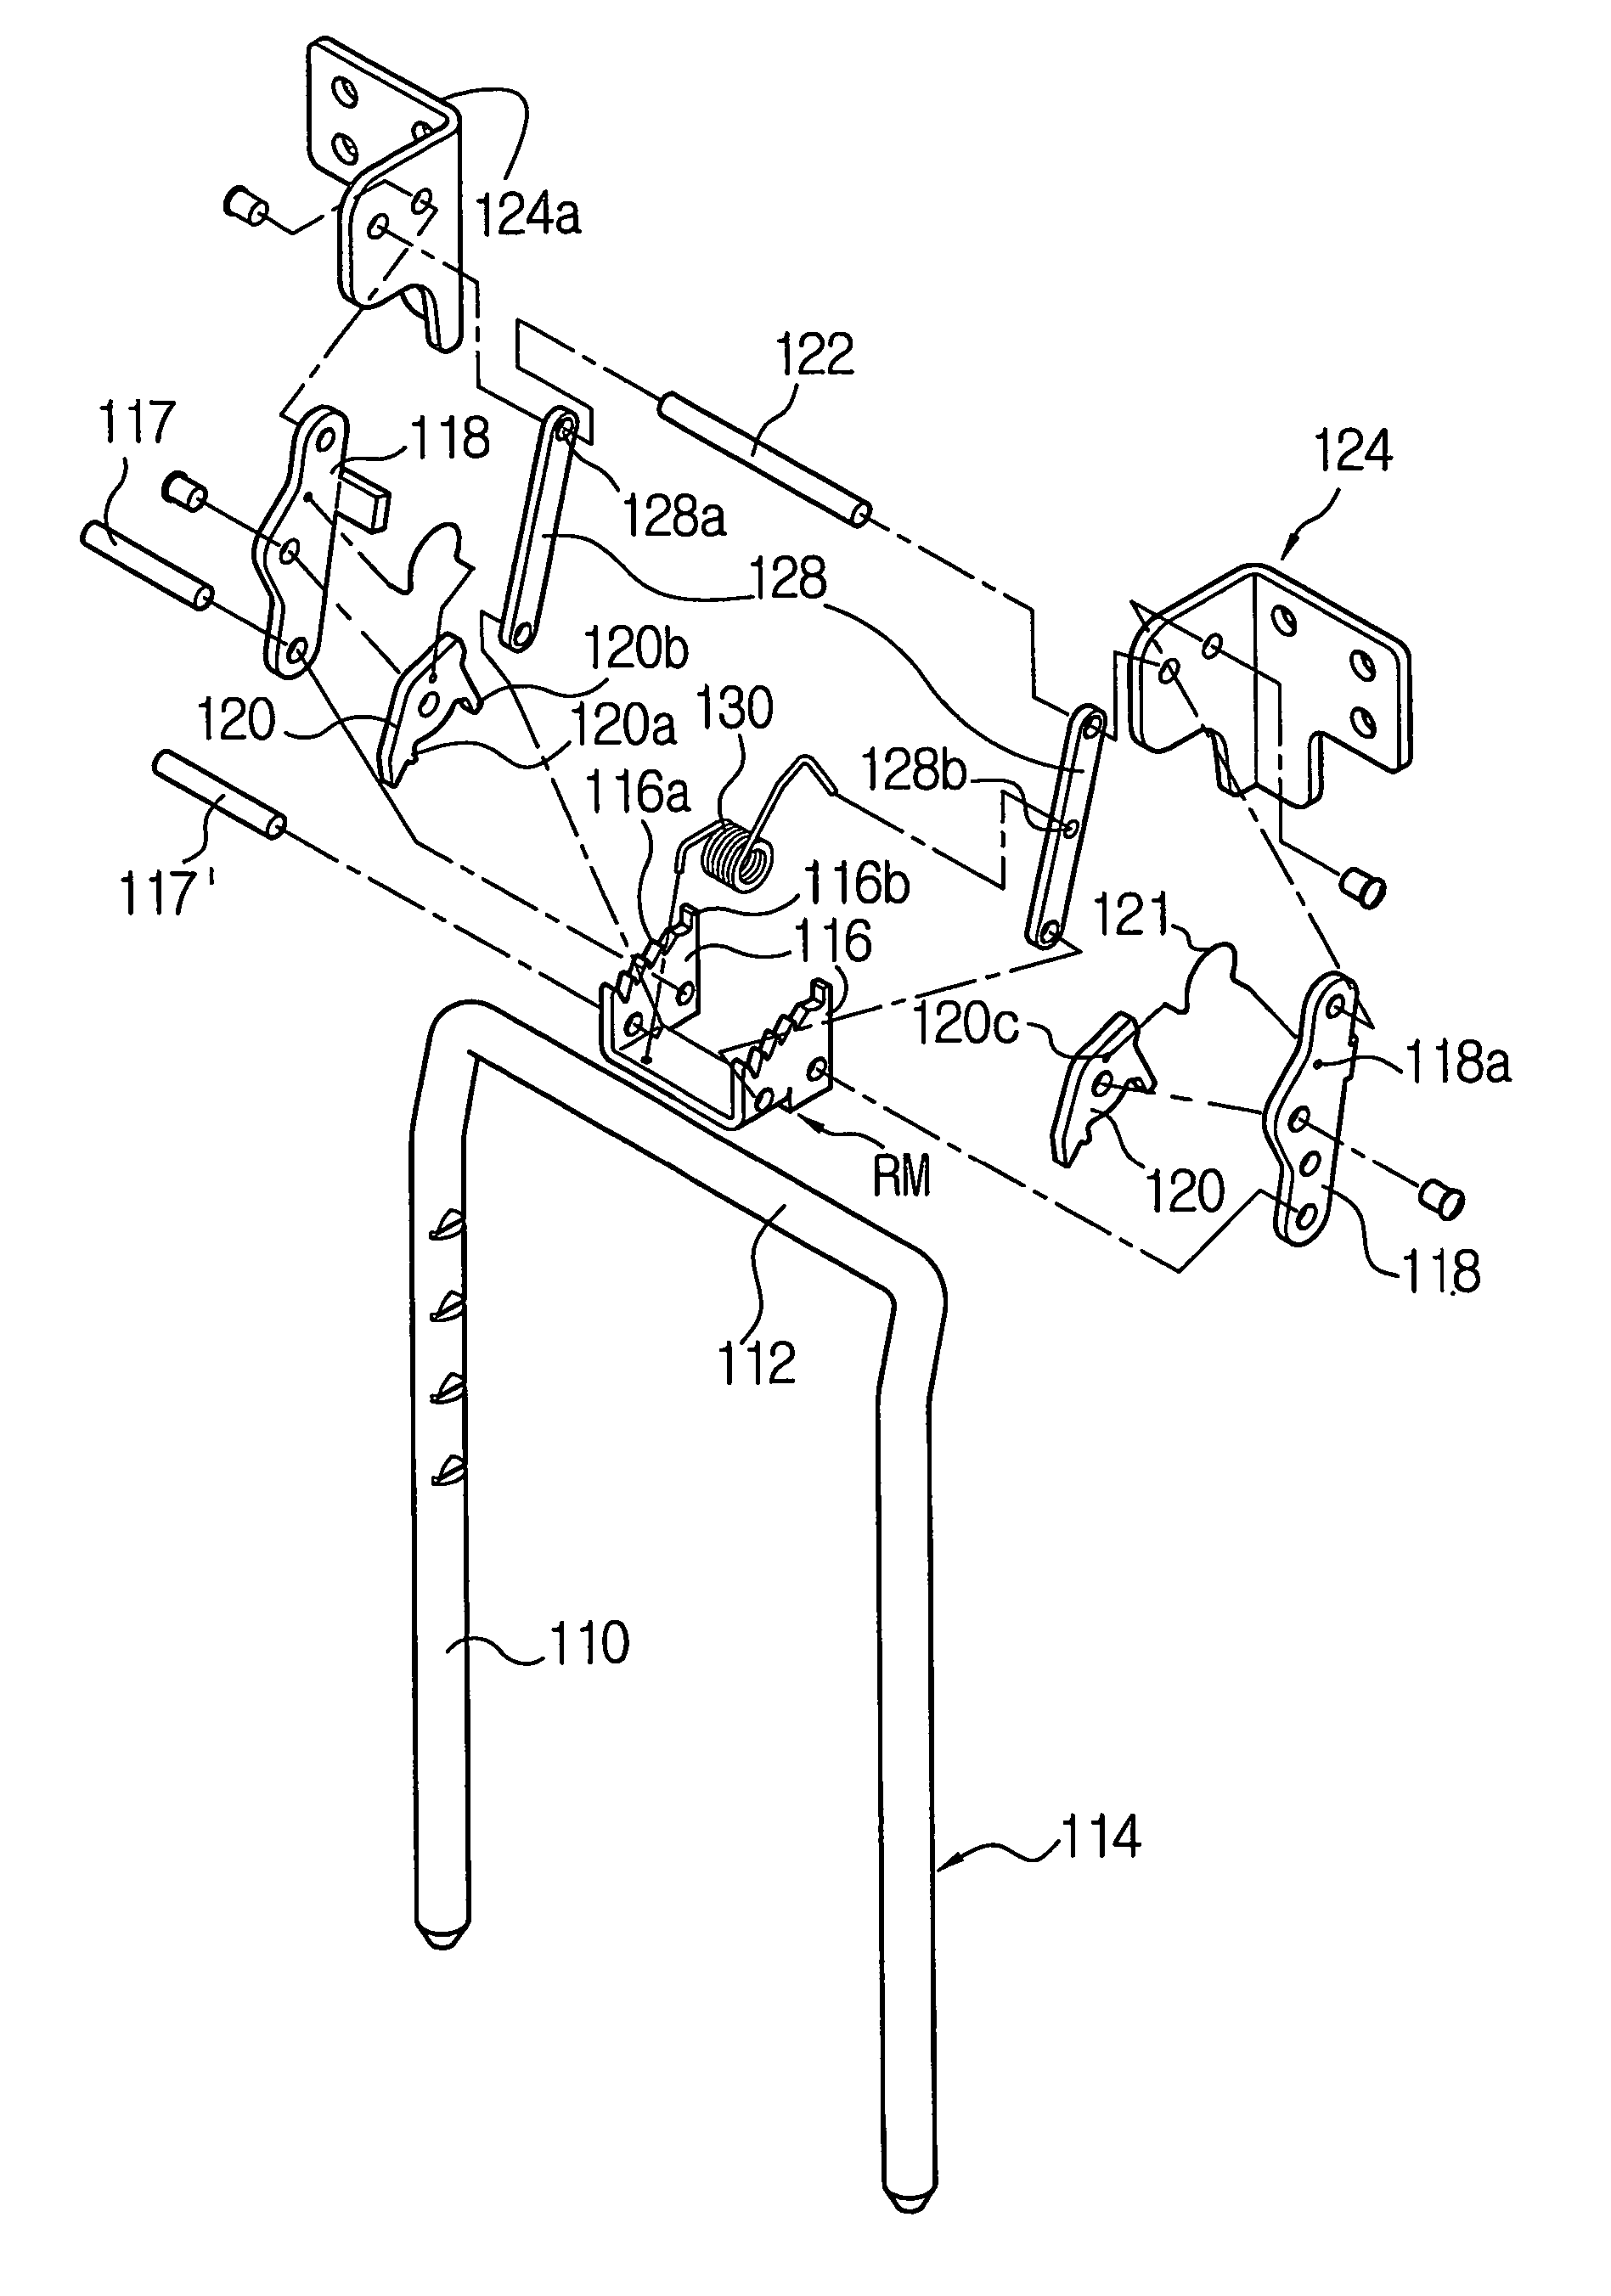 Device for moving headrest back and forth